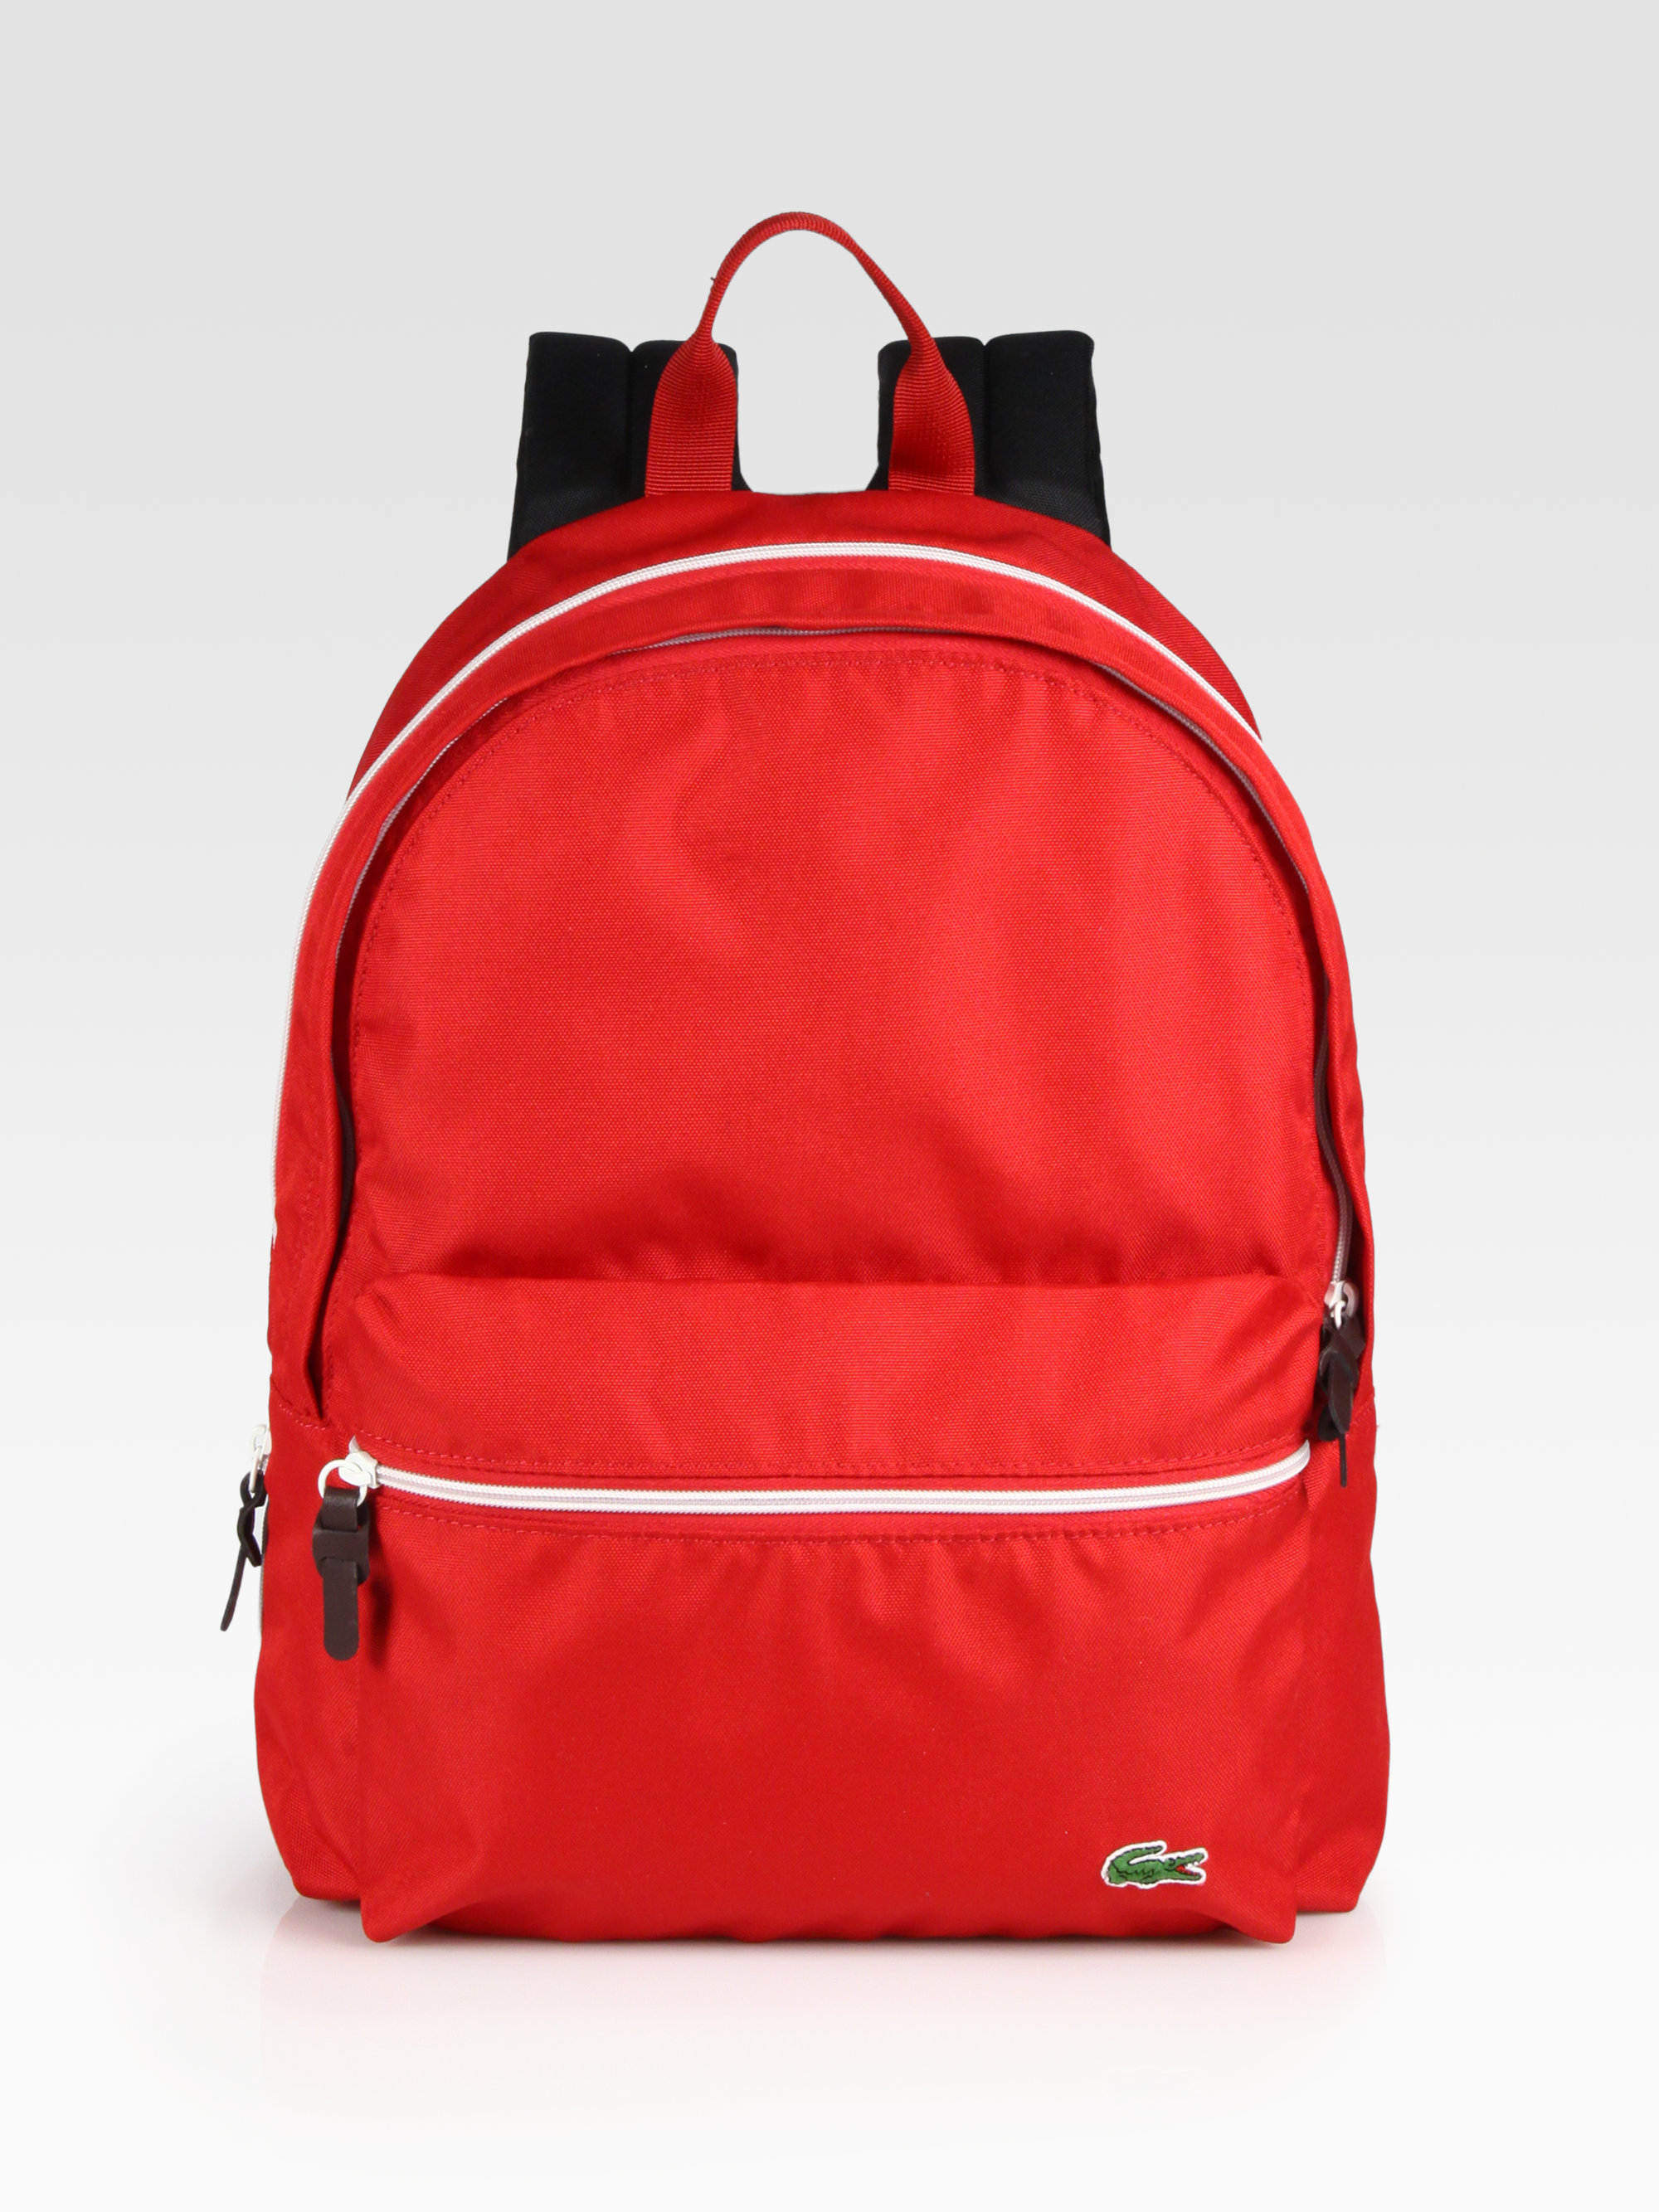 lacoste red backpack